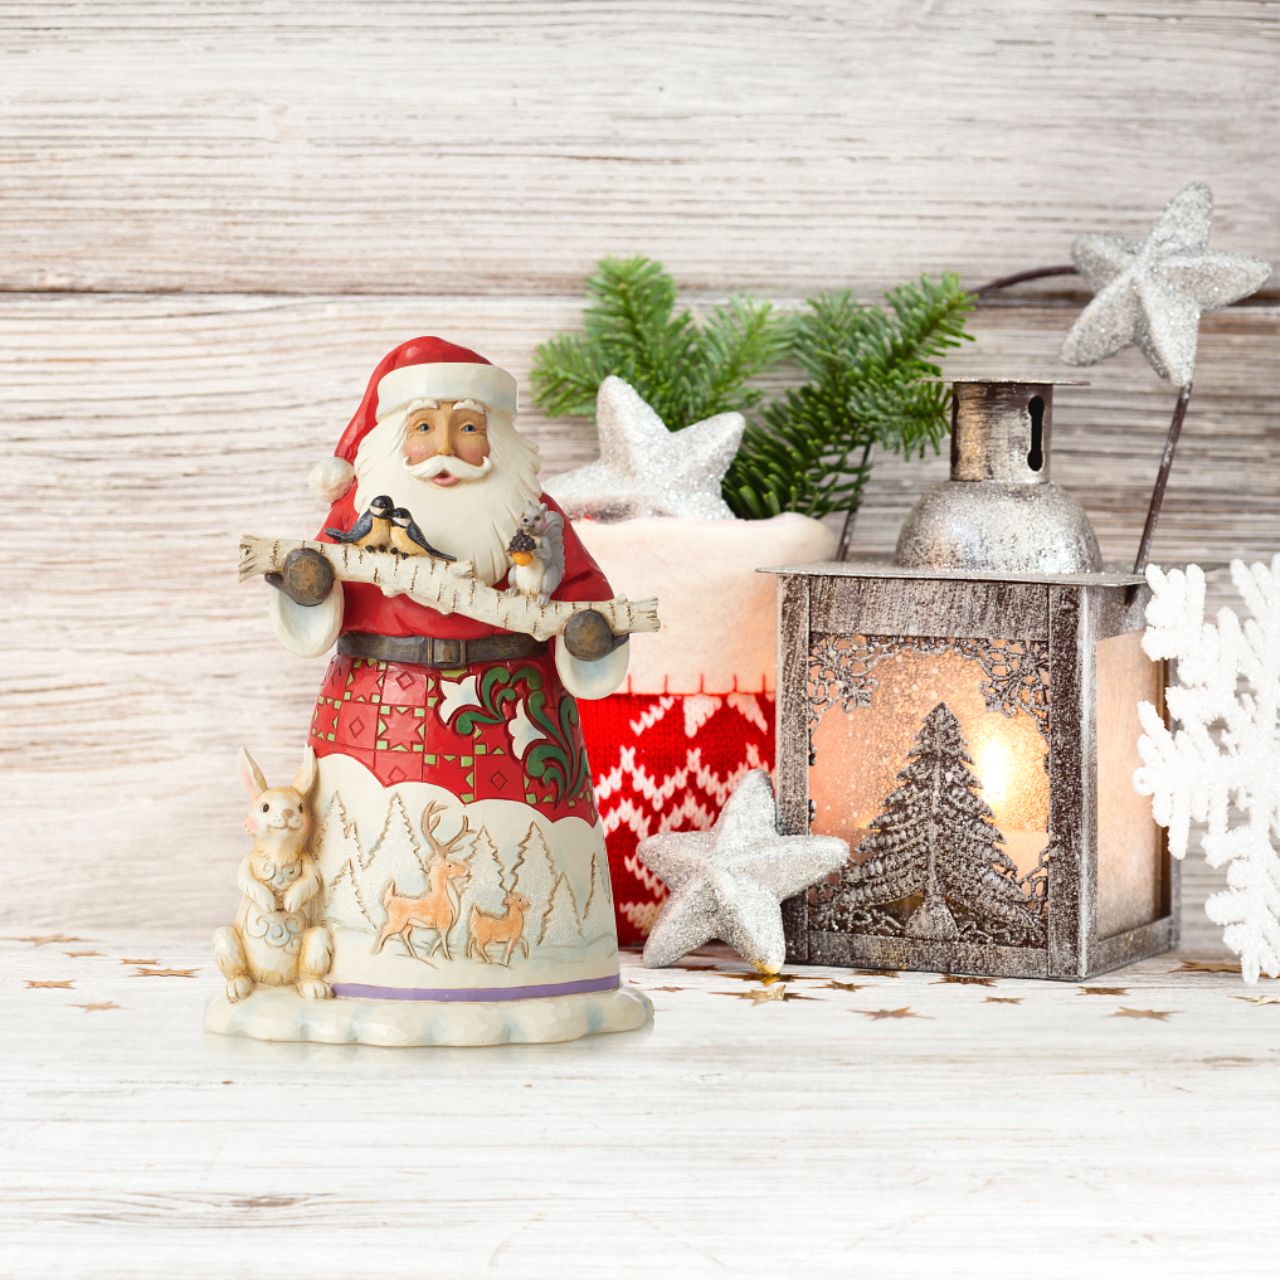 Jim Shore Santa With Birch Branch and Animals Figurine A woodland Santa has a bunny at his feet and holds a birch branch with tiny birds perched on it in this sweet Jim Shore figurine. Santa's cloak features an intricately designed design of deer in a winter landscape. 